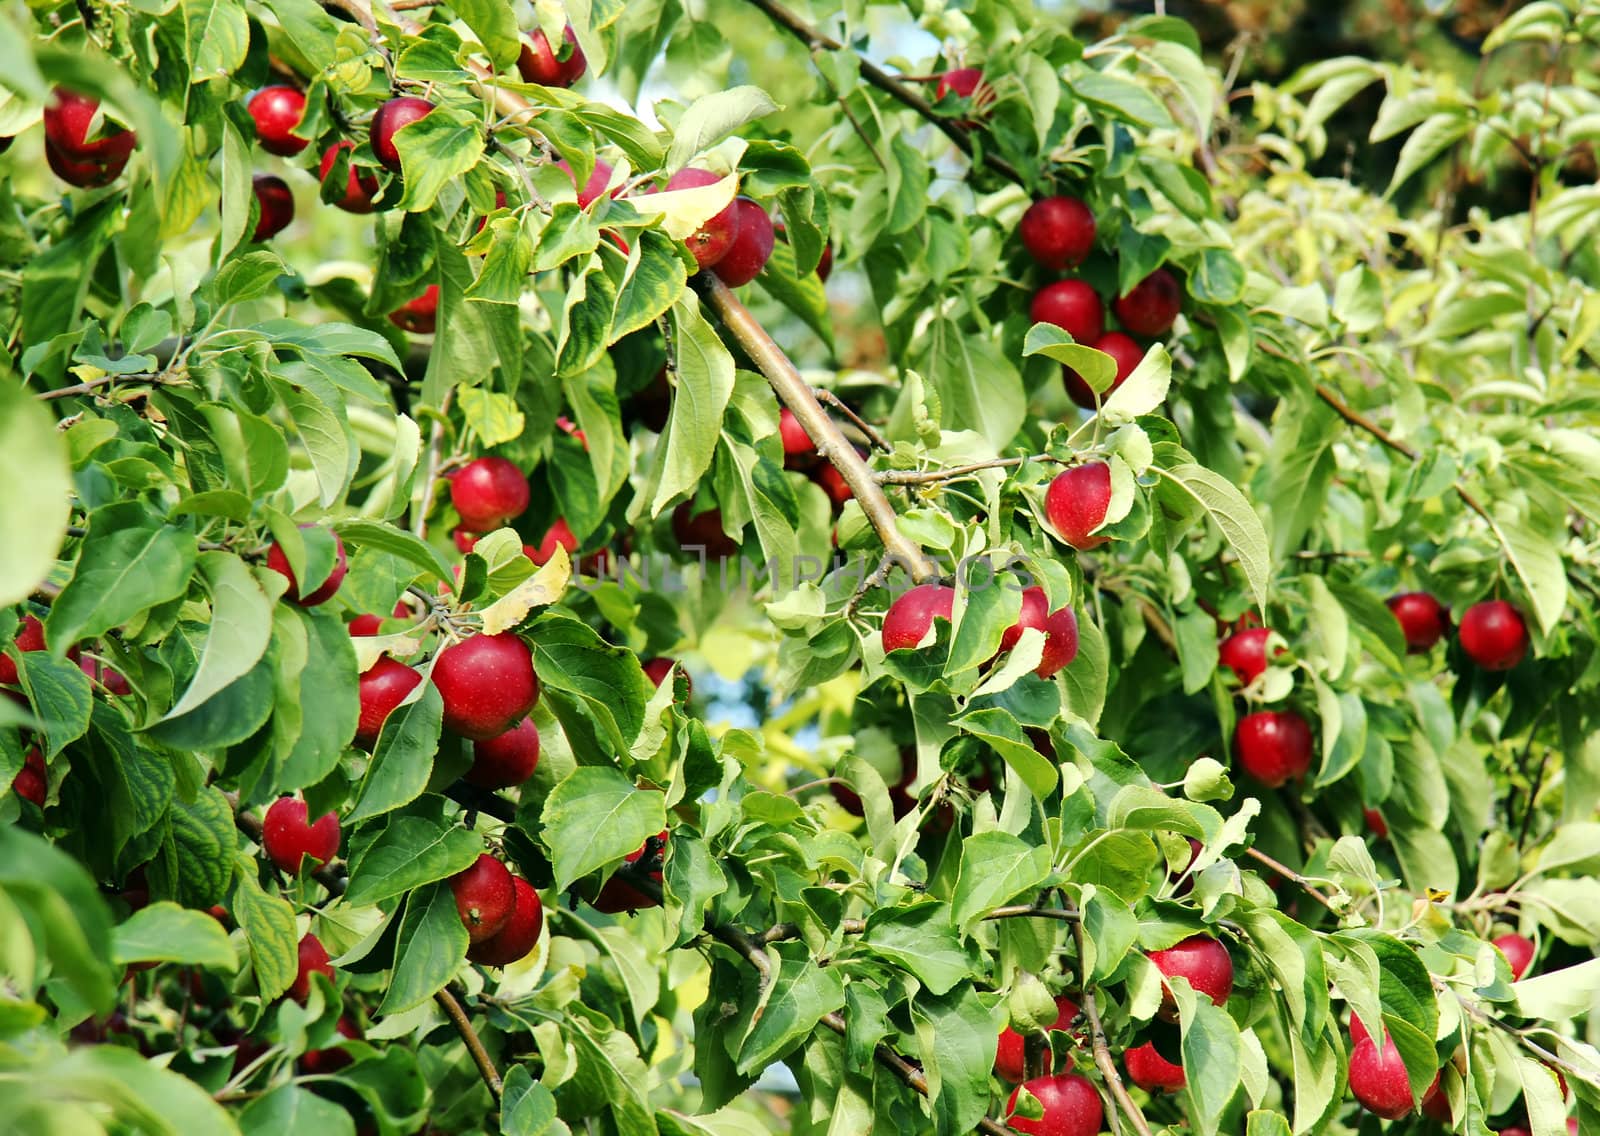 Apple tree branches full of bright red ripe apples ready for the picking.